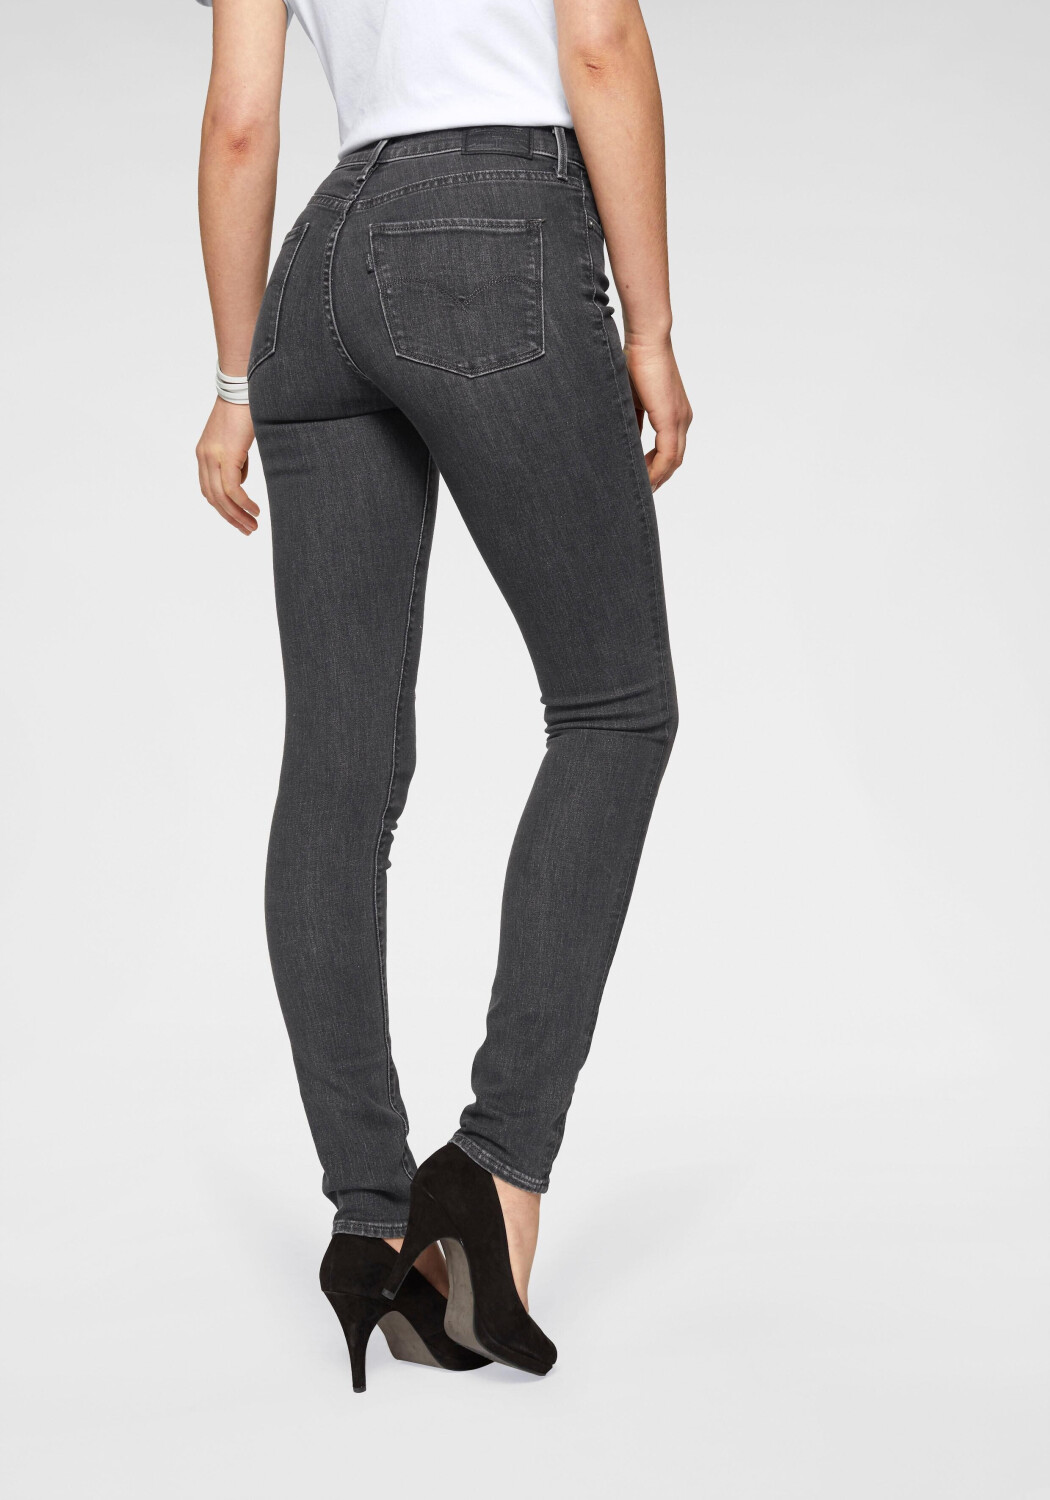 Buy Levi's 311 Shaping Skinny Jeans pebble grey from £69.60 (Today ...